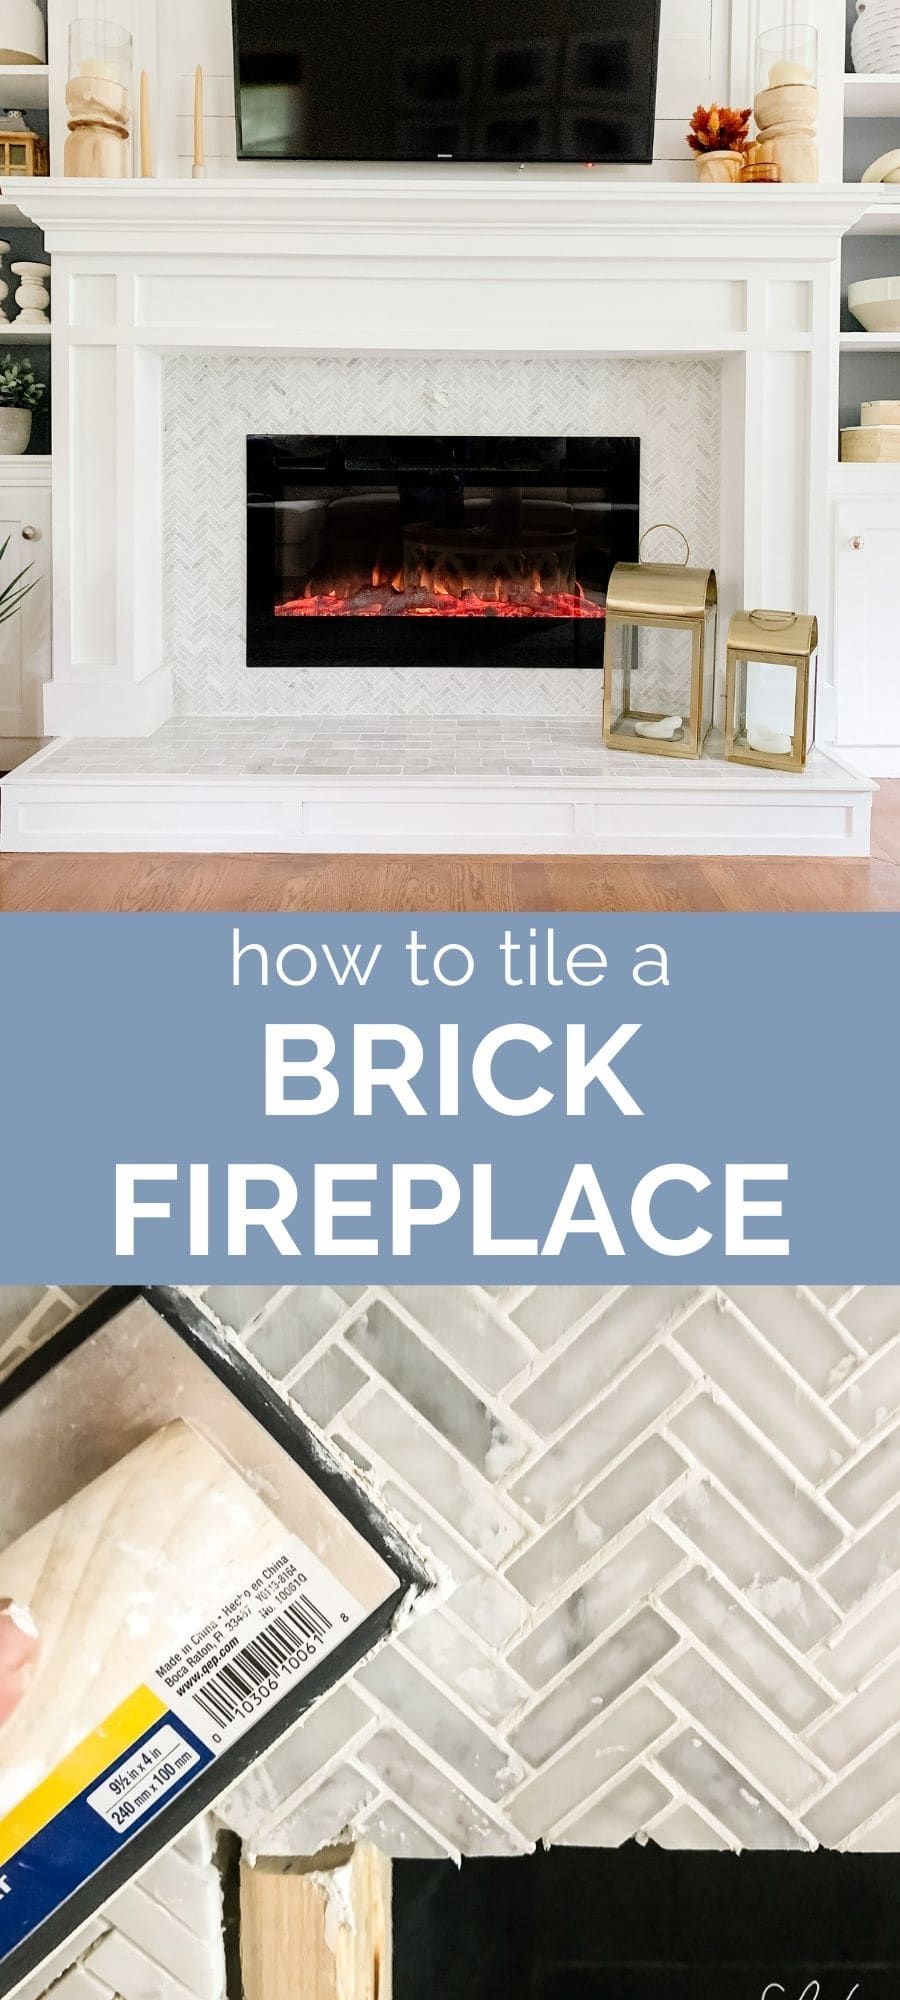 How to Remove Tile from Brick Fireplace 